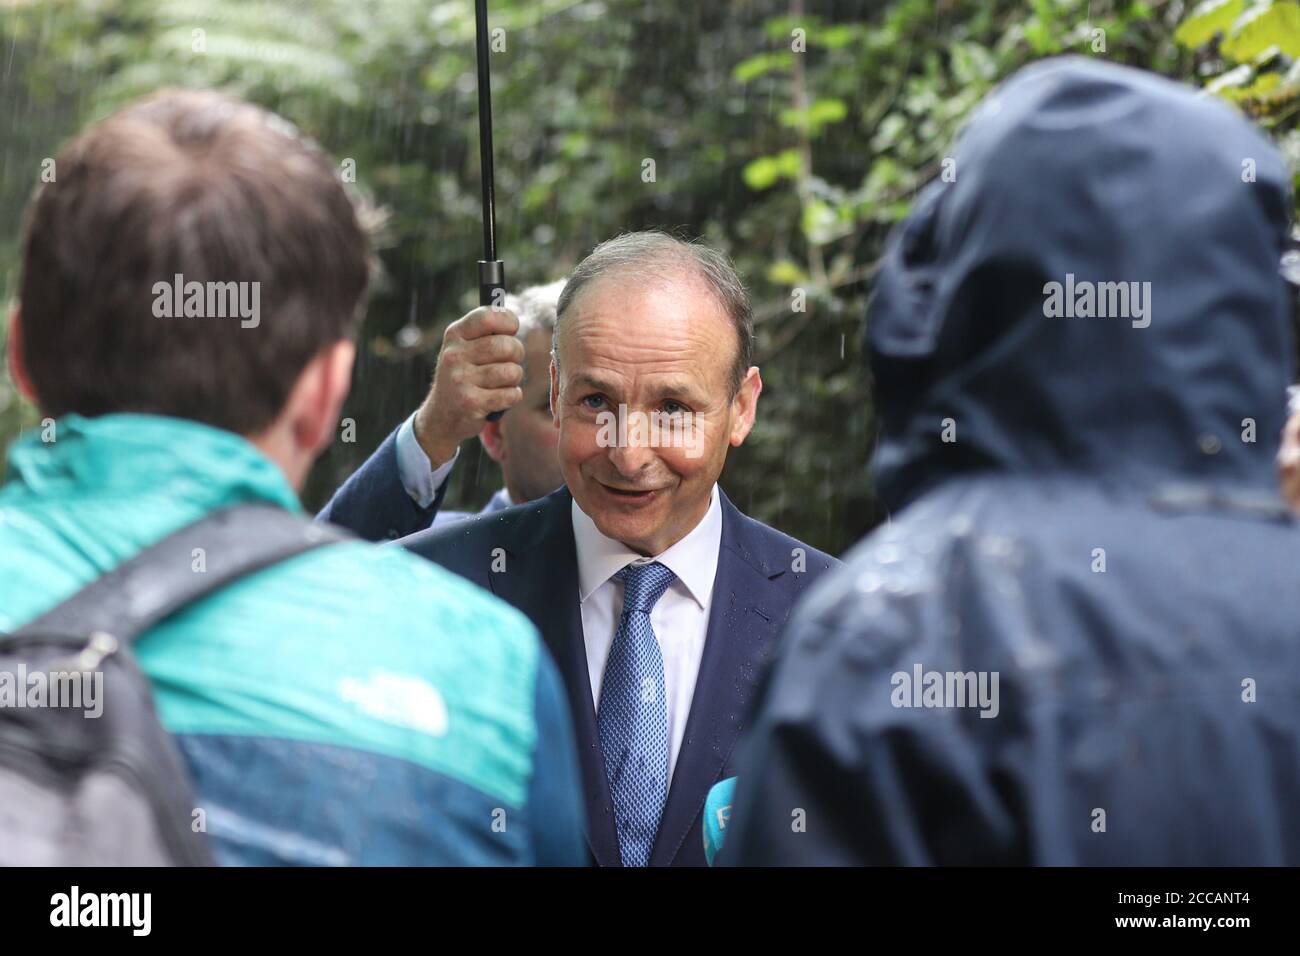 An Taoiseach Micheal Martin takes questions from the media as he visits the flood damaged houses and businesses of Skibbereen after a flood caused extensive damage to a number of premises in the popular Irish tourist town. Photo Damien Storan. Stock Photo